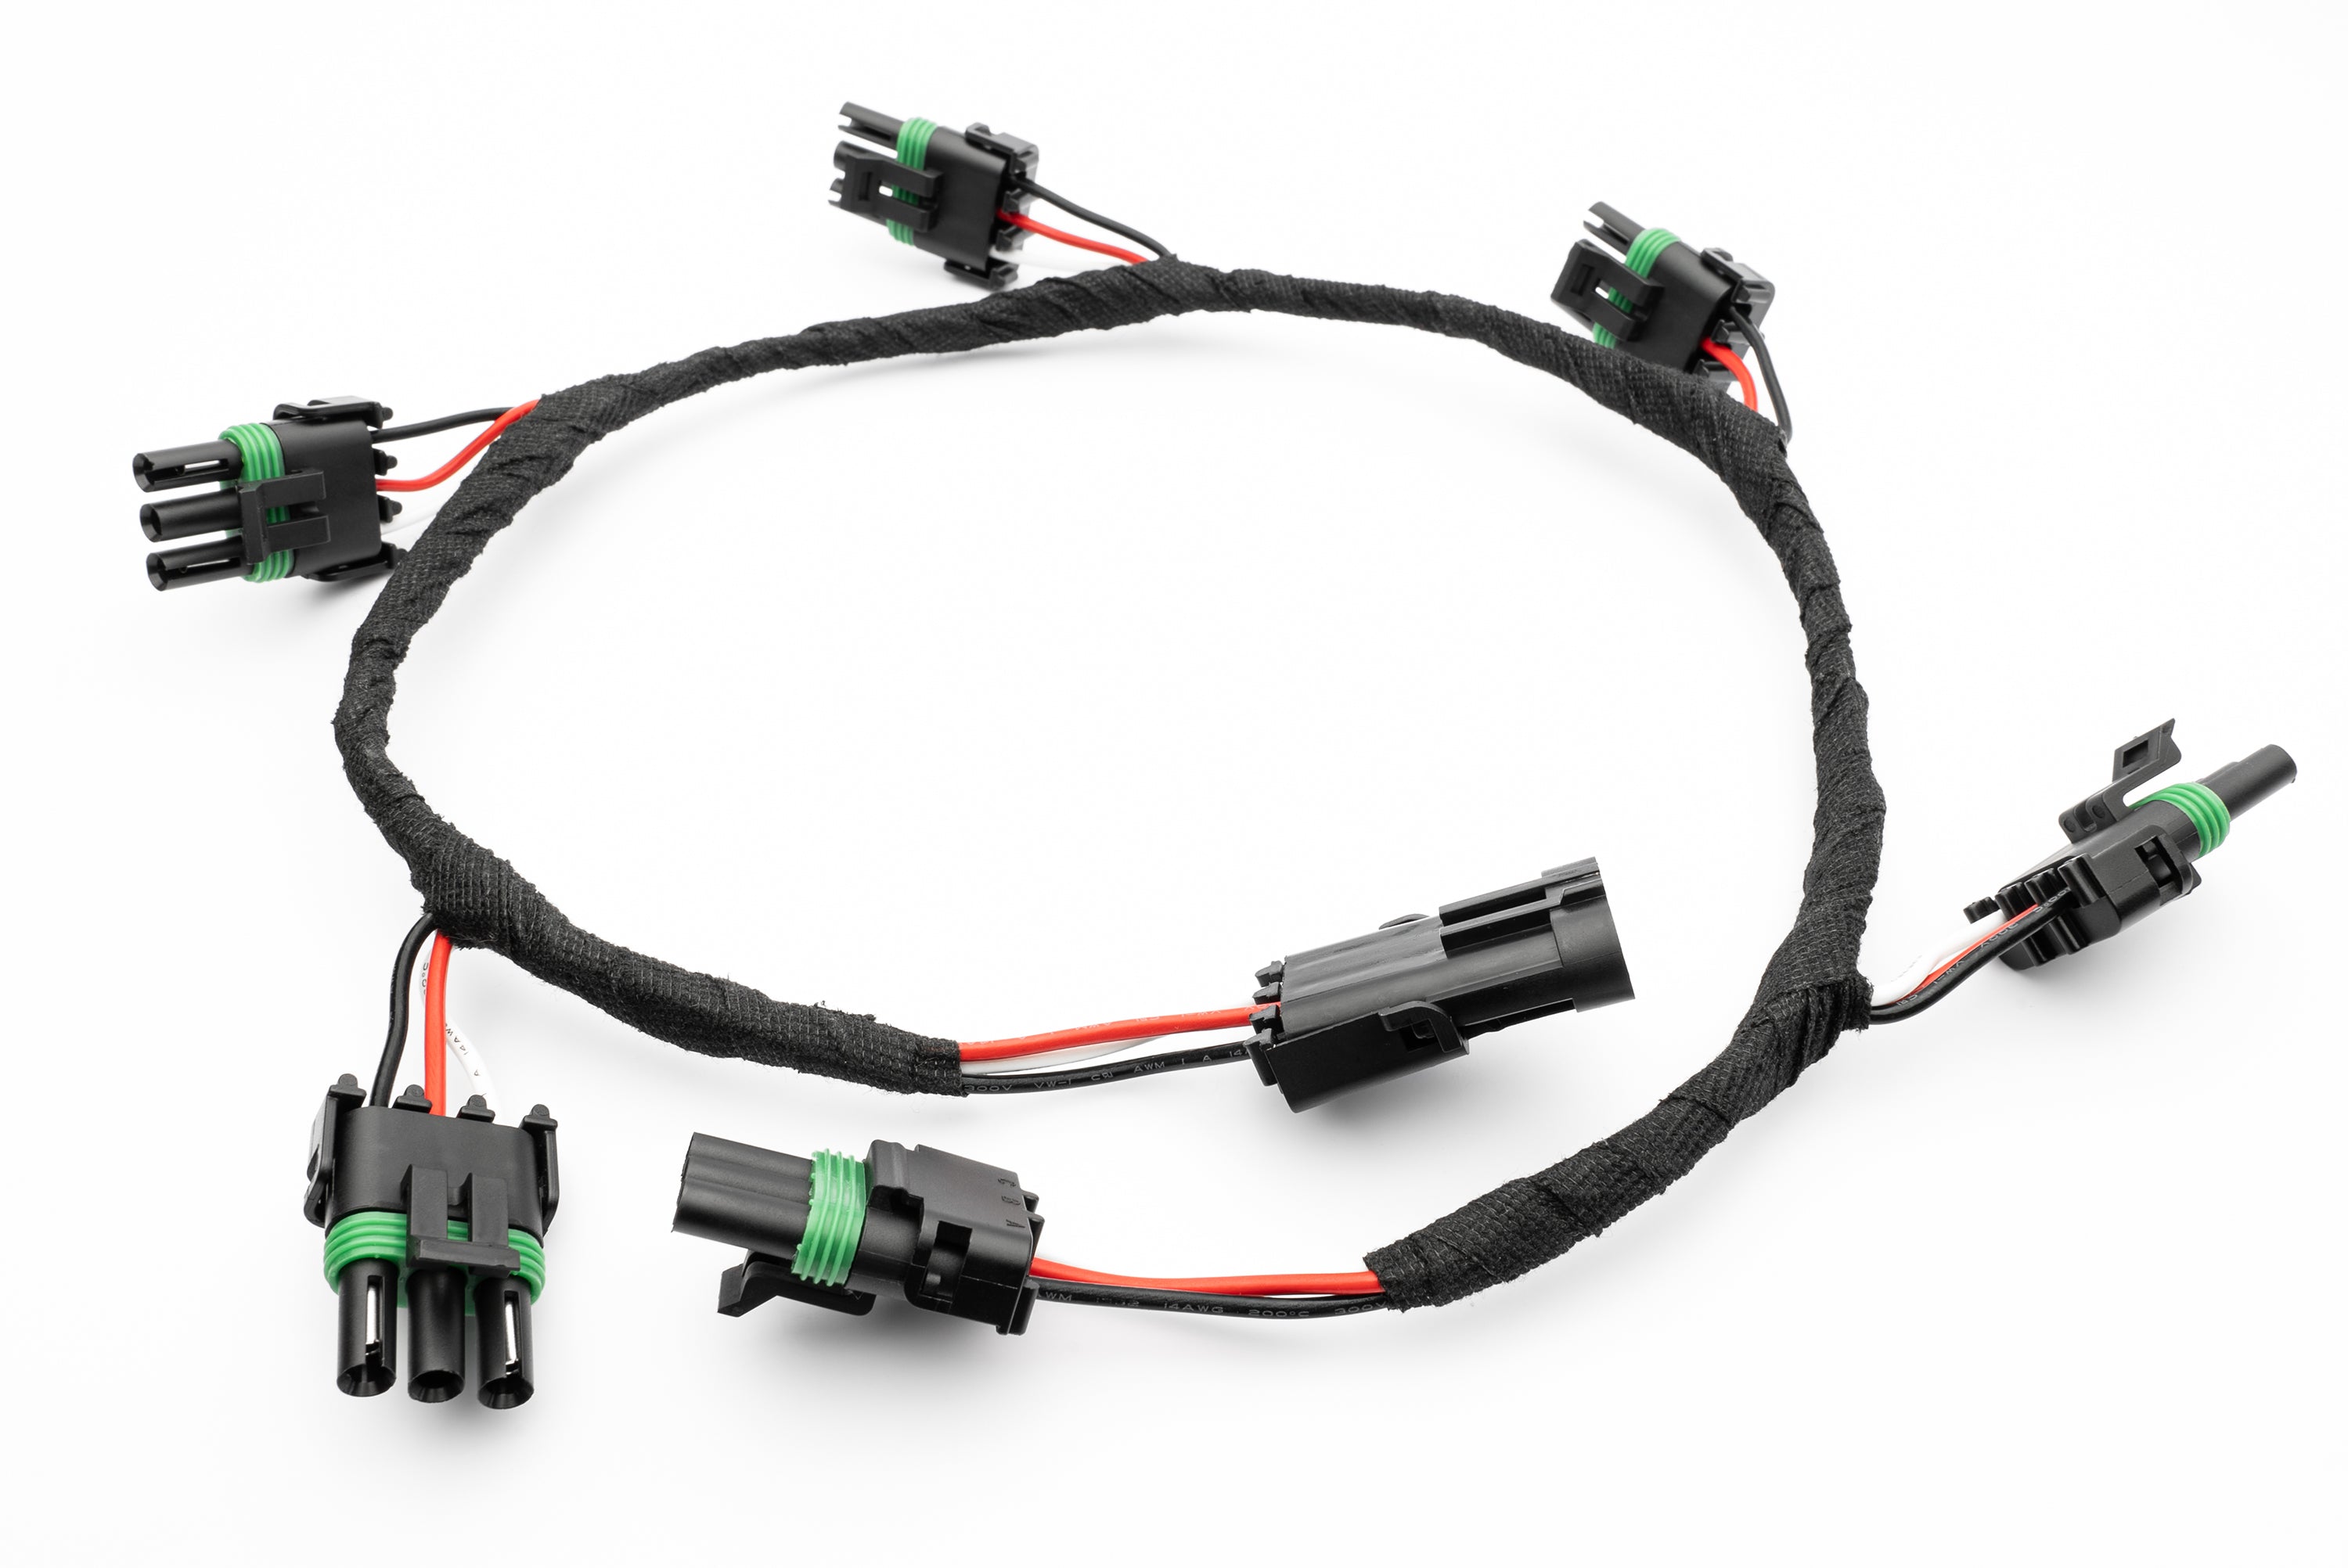 6X 3 Pole WP Connector Harness Splitter add on - SPV Harness System (Works with MANY vehicles, See Details)